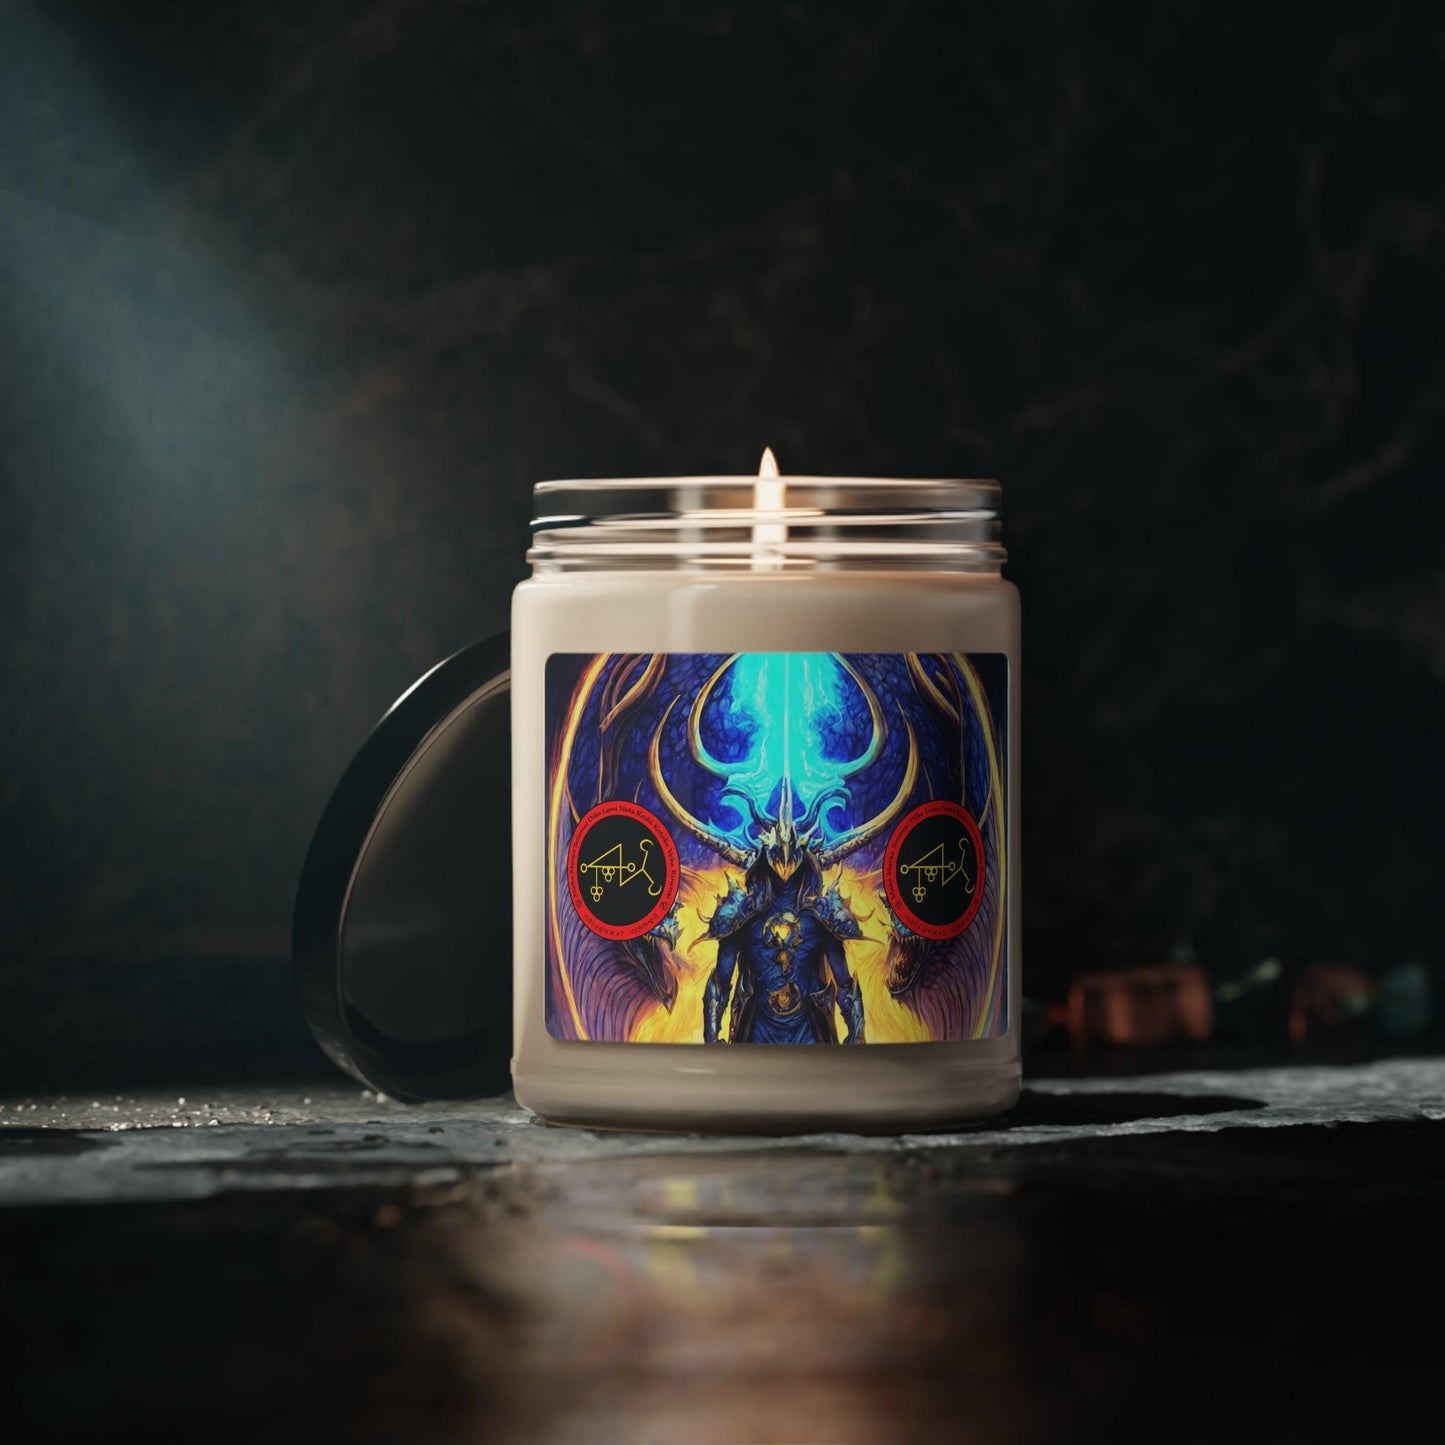 Demon-Marax-Altar-Scented-Soyed-Candle-To-Learn-Magic-and-witchcraft-in-προσφορές-τελετουργίες-μύηση-ή-προσευχή-και-διαλογισμός-25